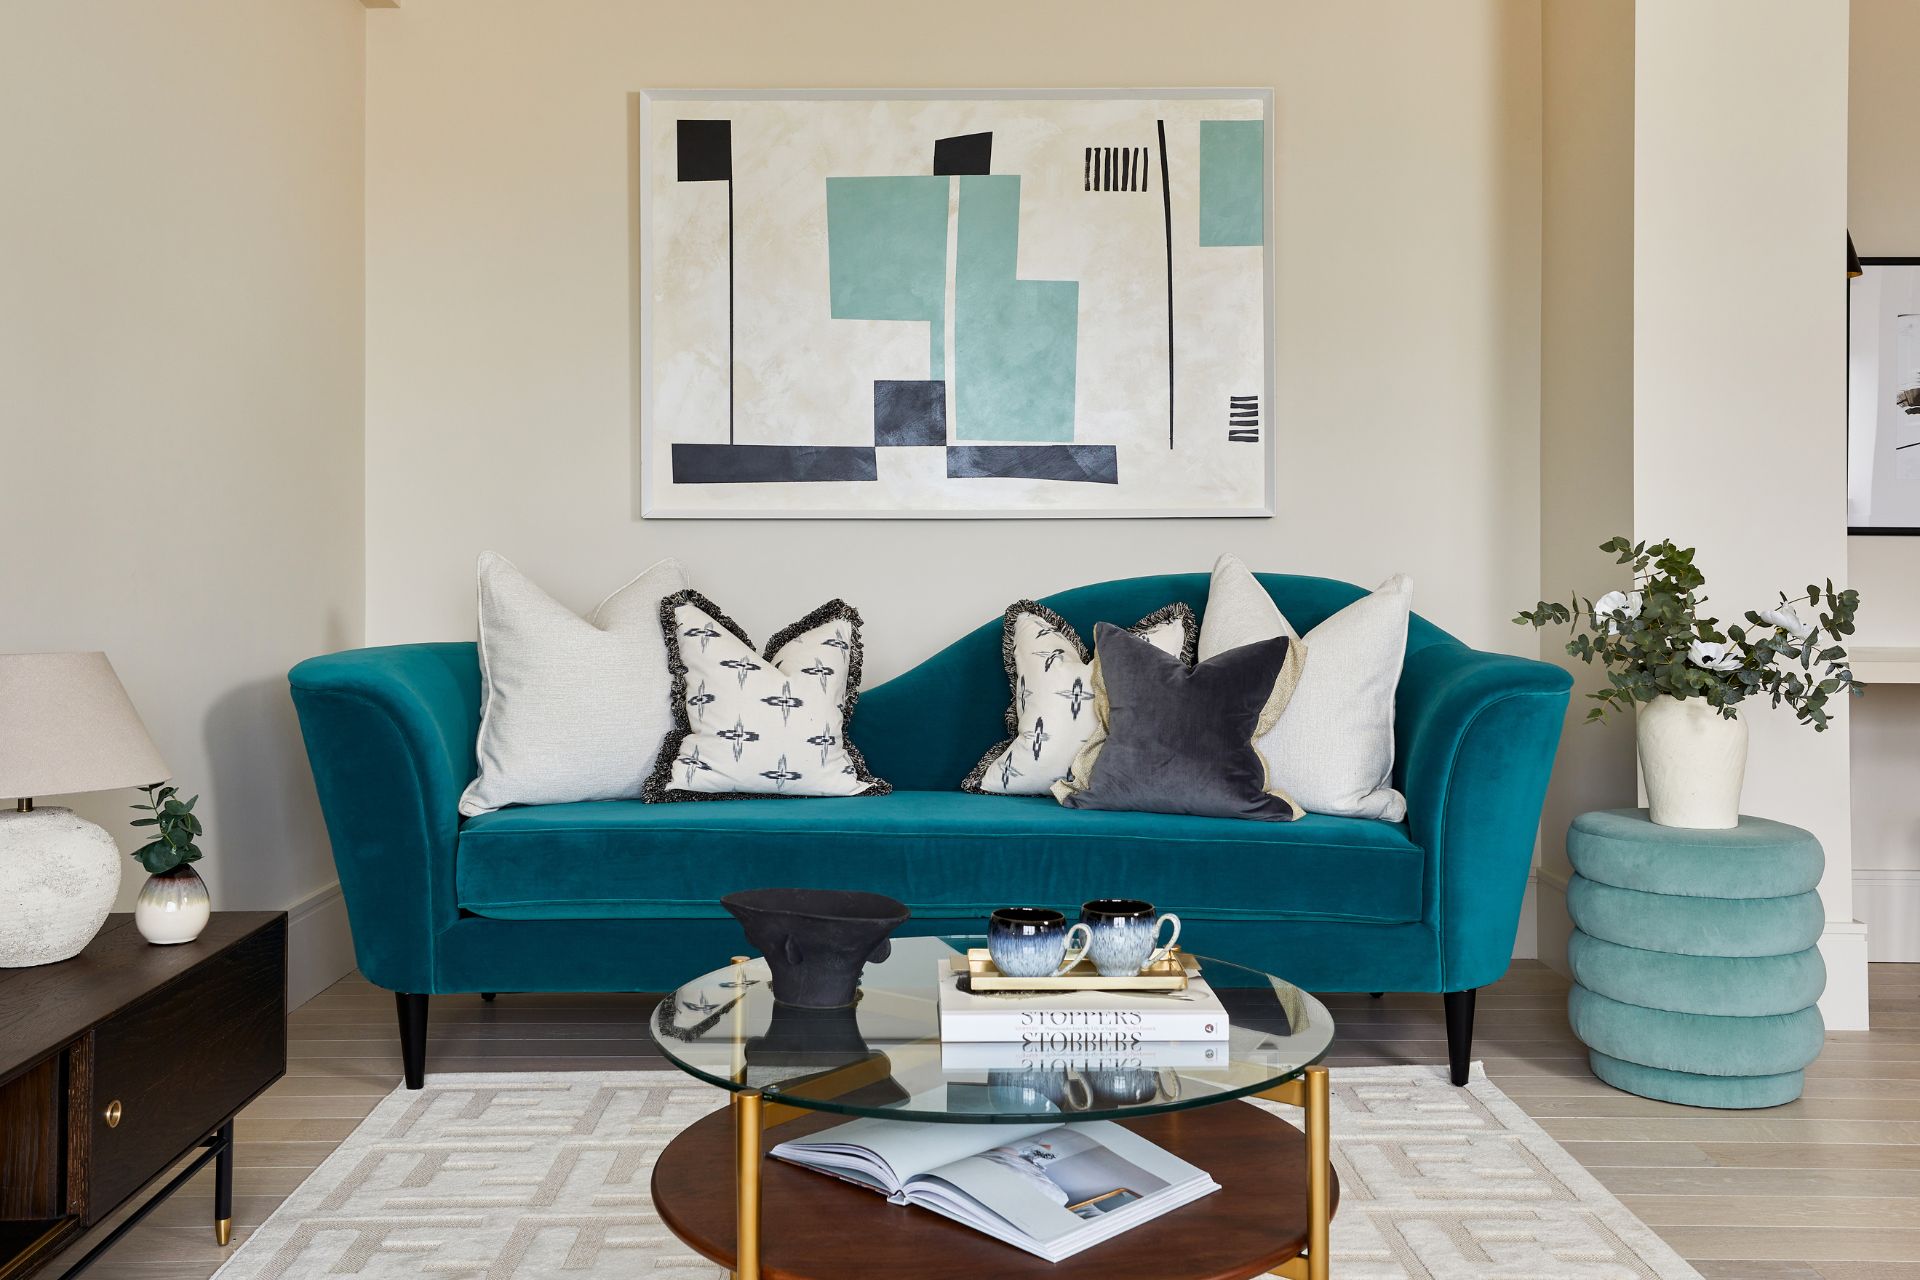 Living room with teal velvet sofa, white and blue patterned cushions and a cream rug.